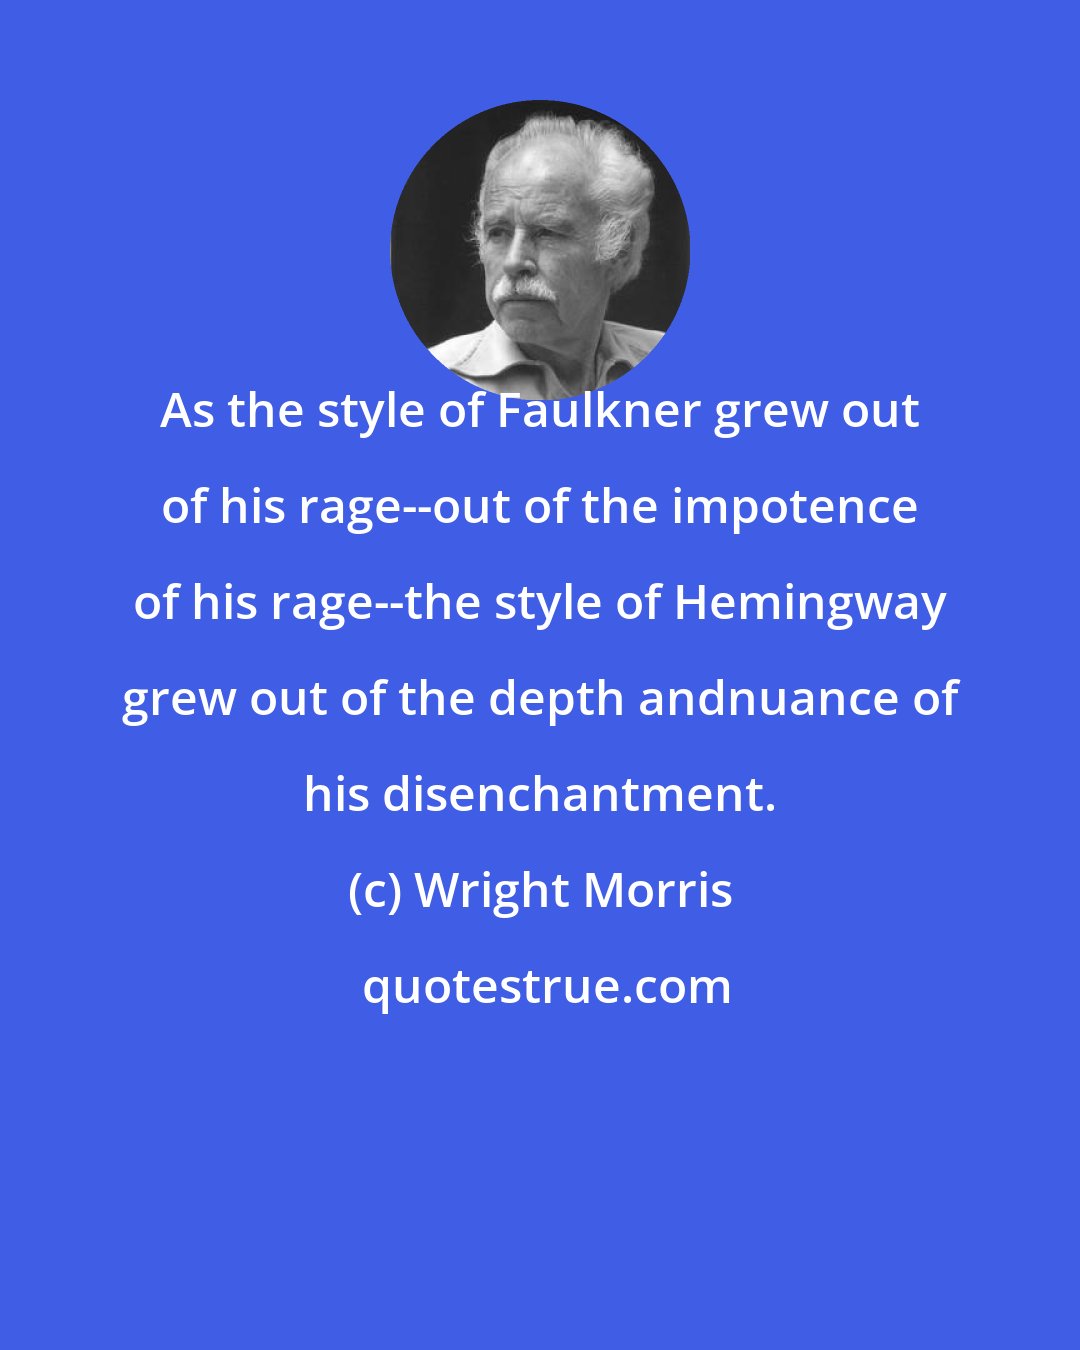 Wright Morris: As the style of Faulkner grew out of his rage--out of the impotence of his rage--the style of Hemingway grew out of the depth andnuance of his disenchantment.